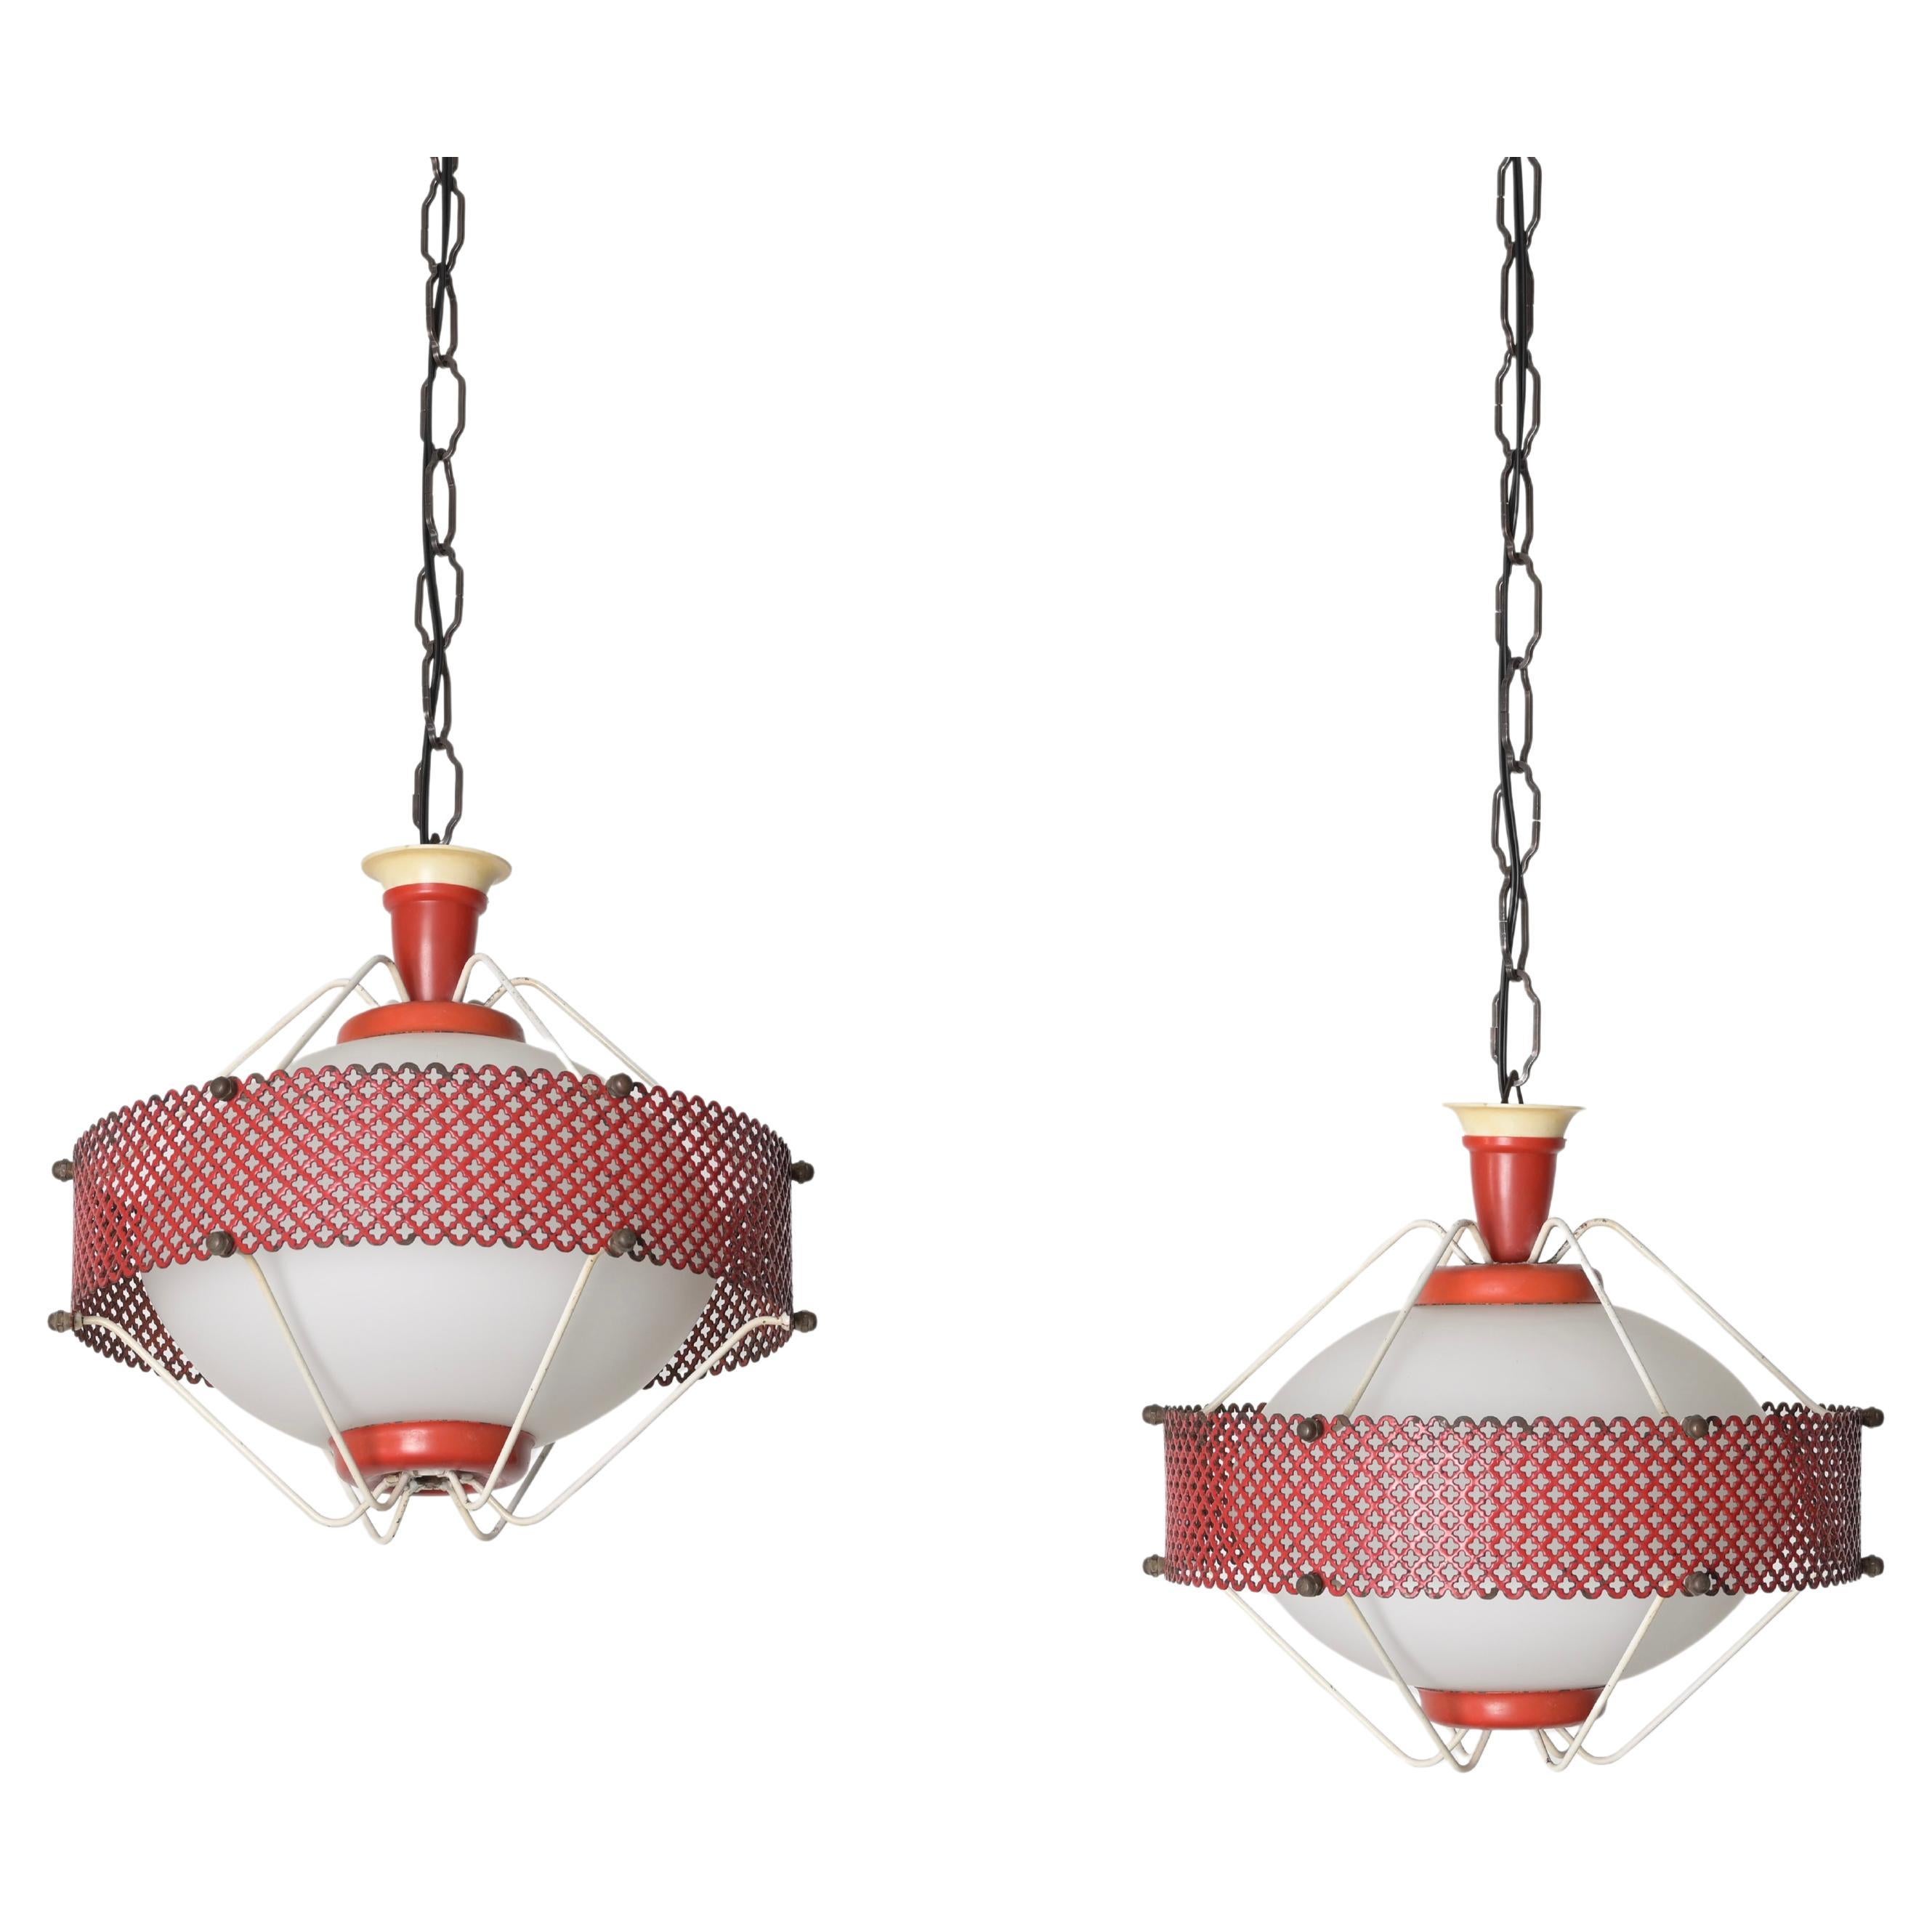 Delightful Mid-Century pendant lamps in opaline glass, red enamelled perforated metal and brass. This incredibly elegant and unique pendants were designed by Mathieu Matégot in France during the 1950s.

The round lines are the protagonists of this